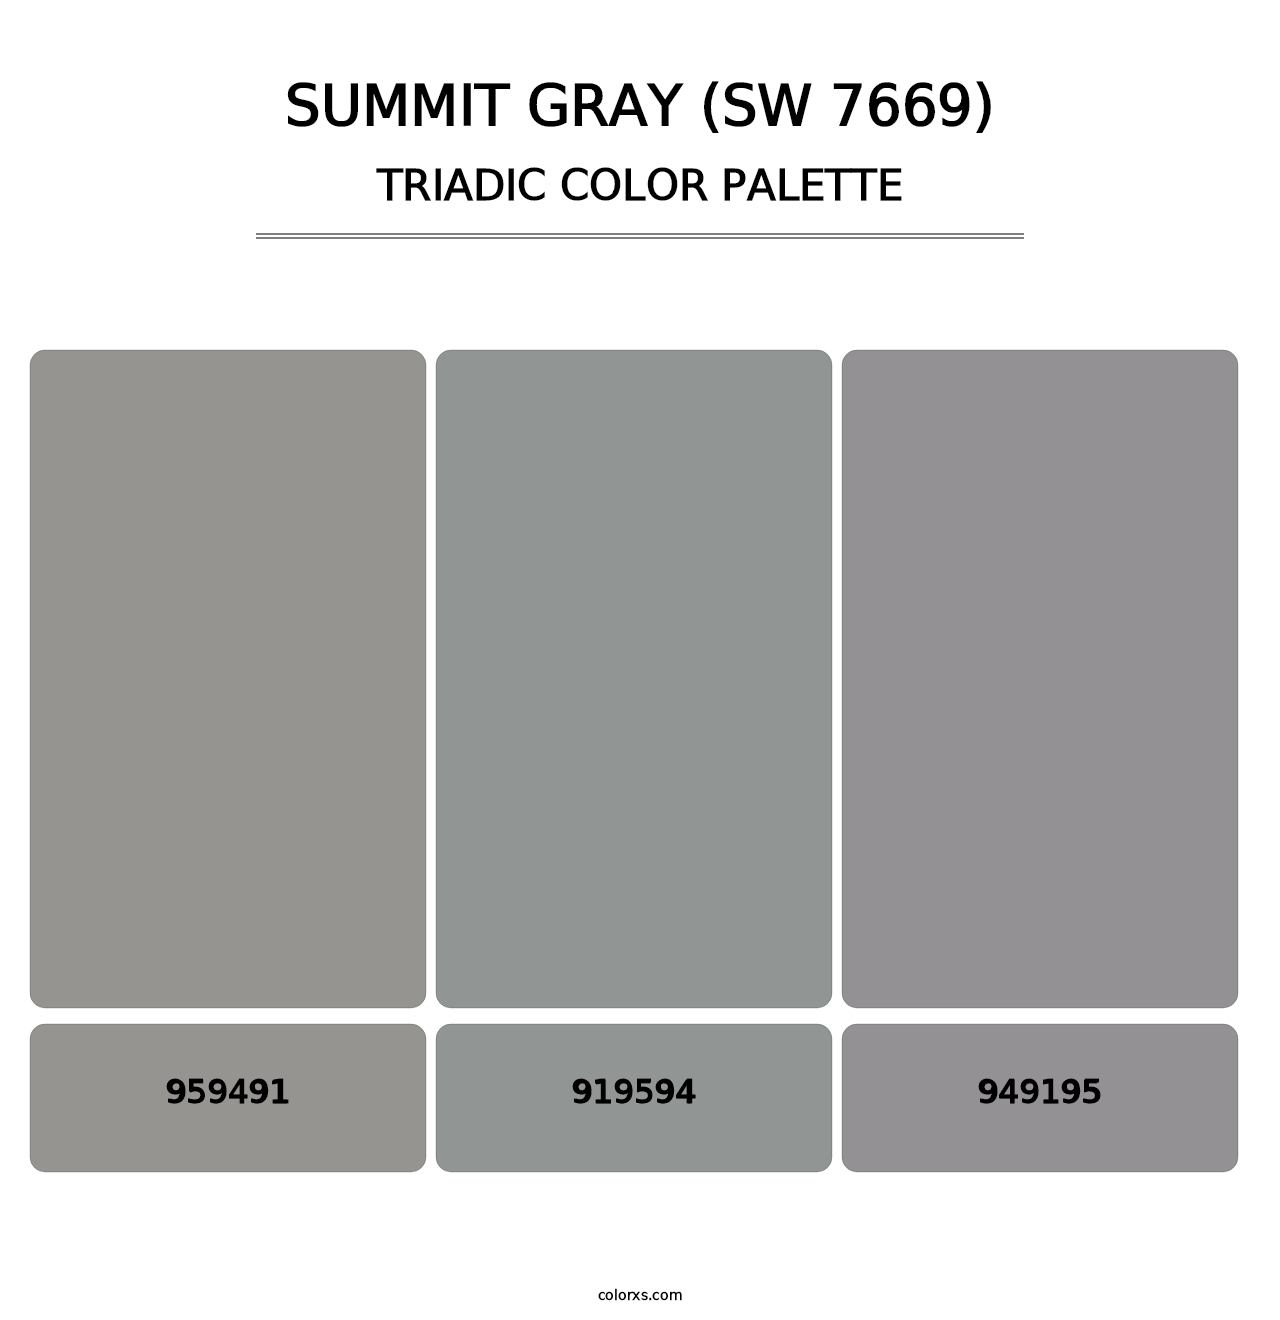 Summit Gray (SW 7669) - Triadic Color Palette